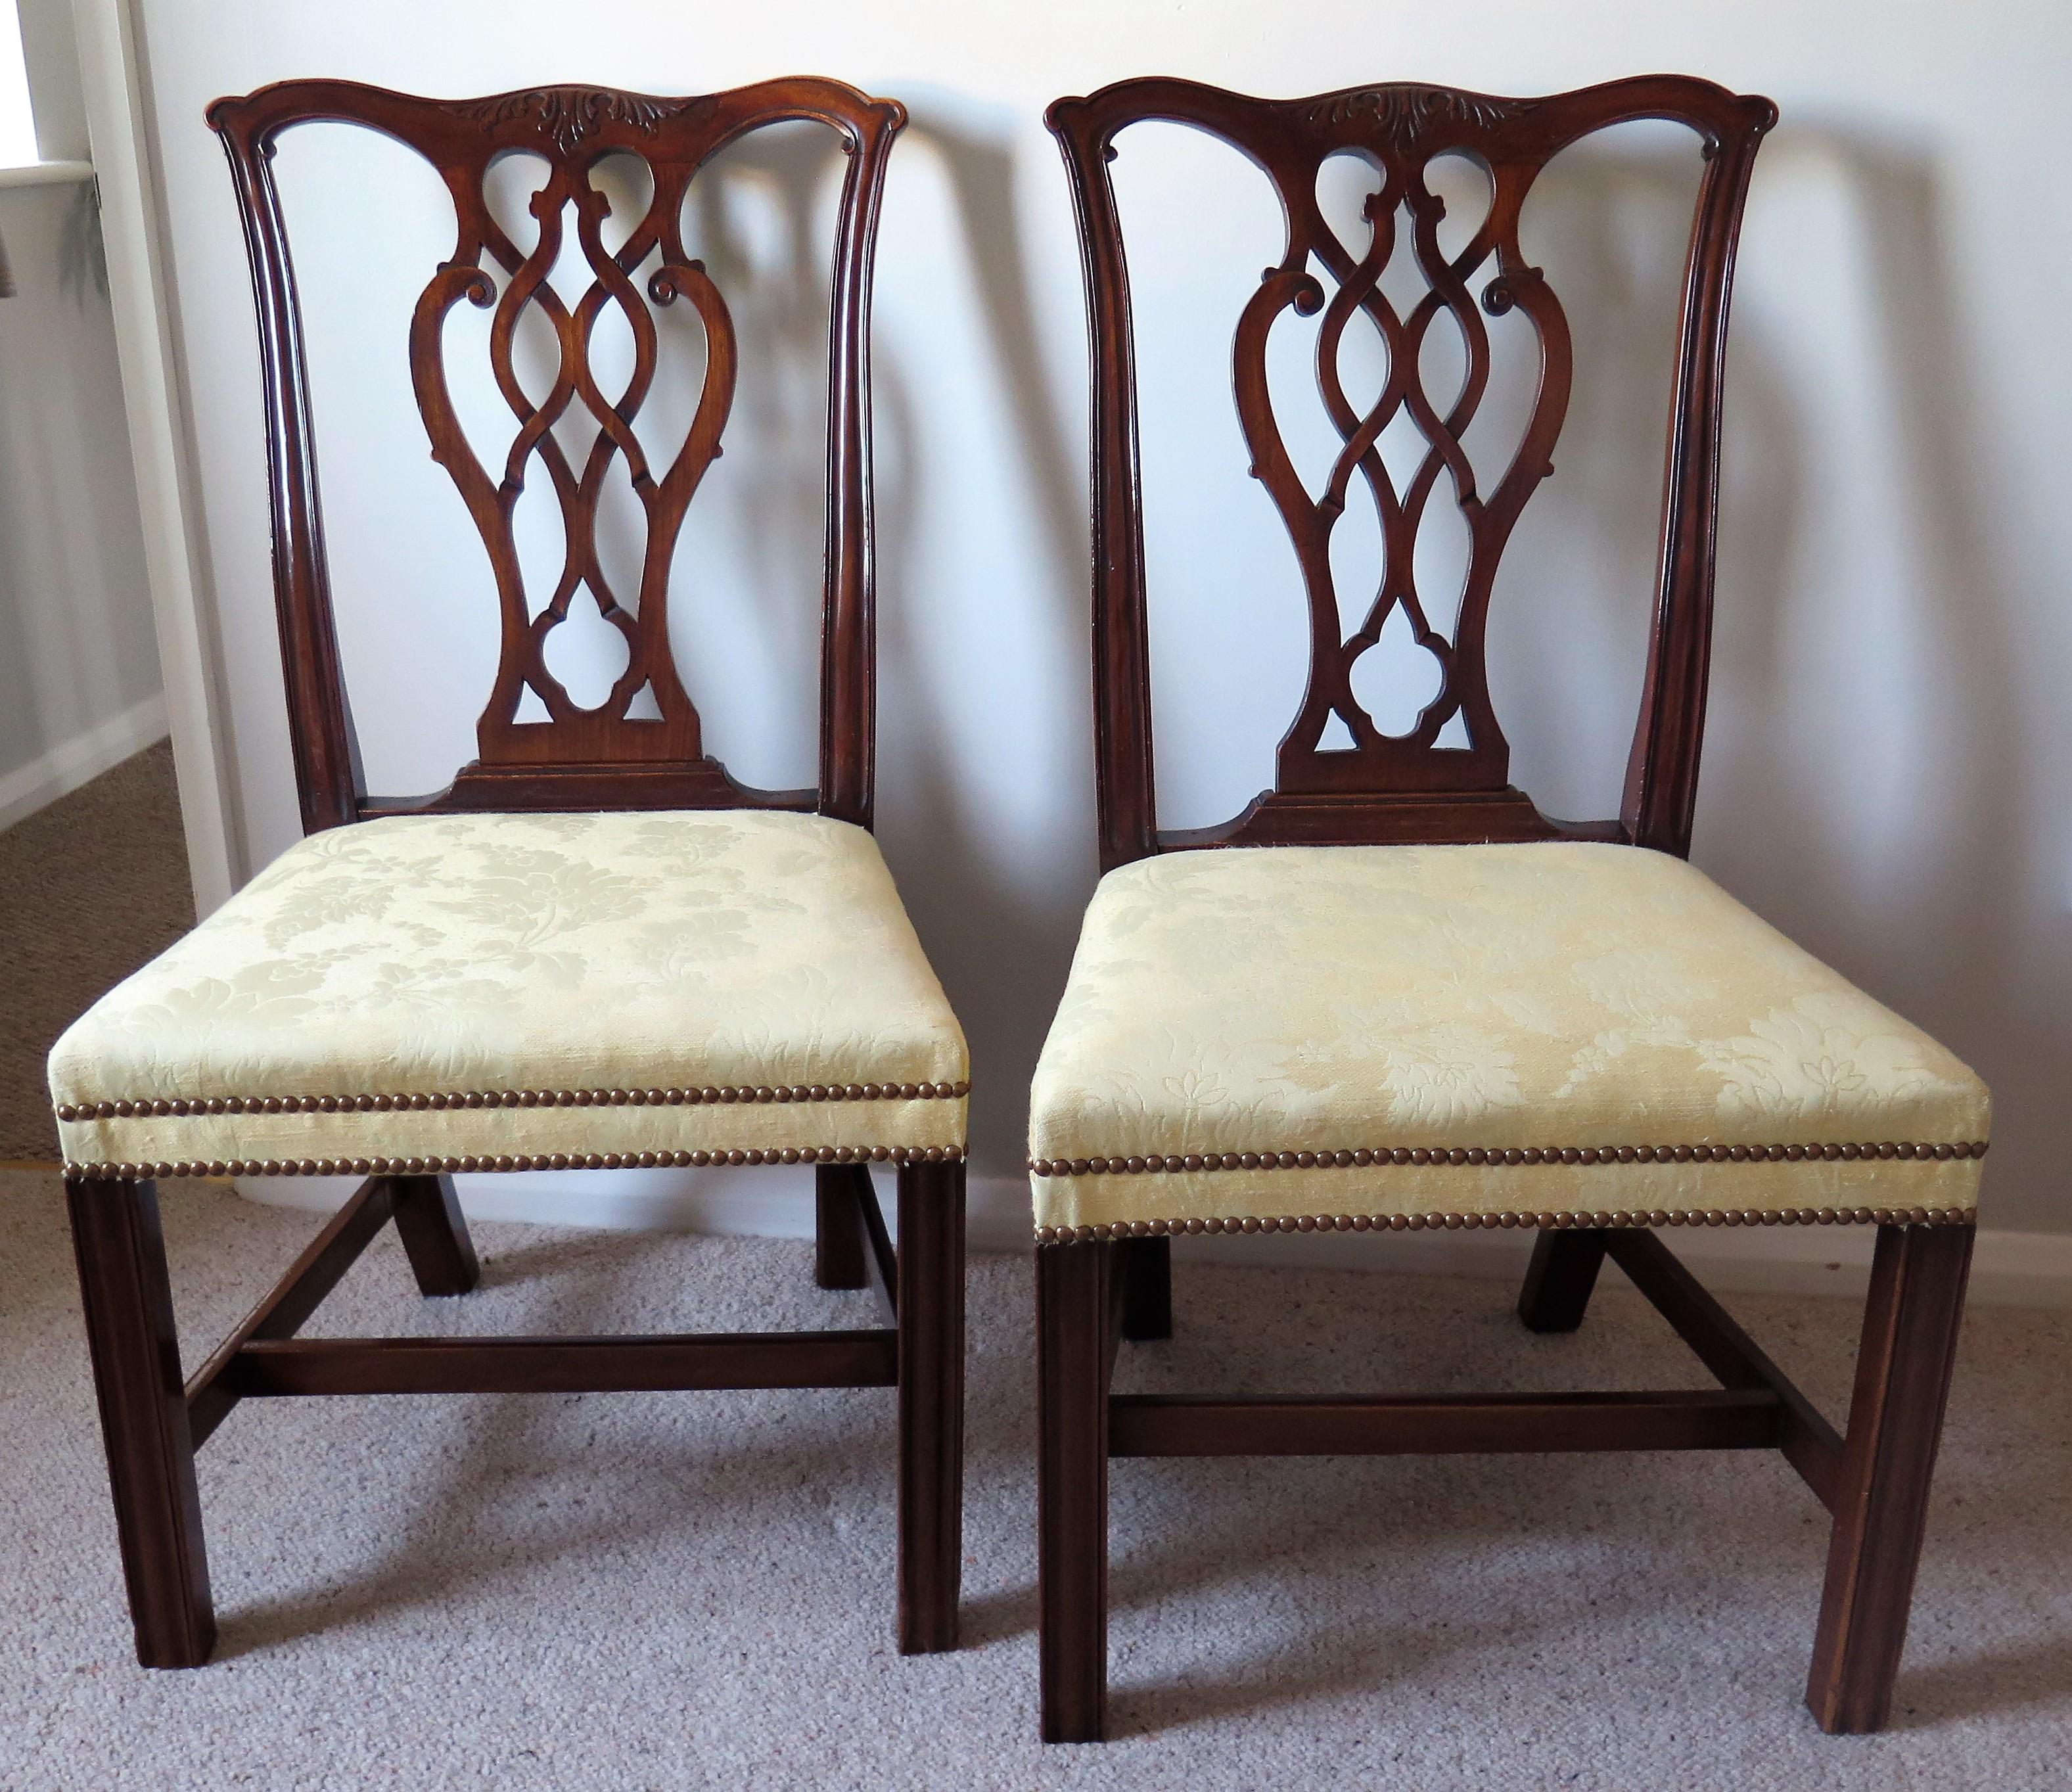 Hand-Crafted Pair of Elegant George 111 Mahogany Chippendale Chairs Reupholstered, Circa 1770